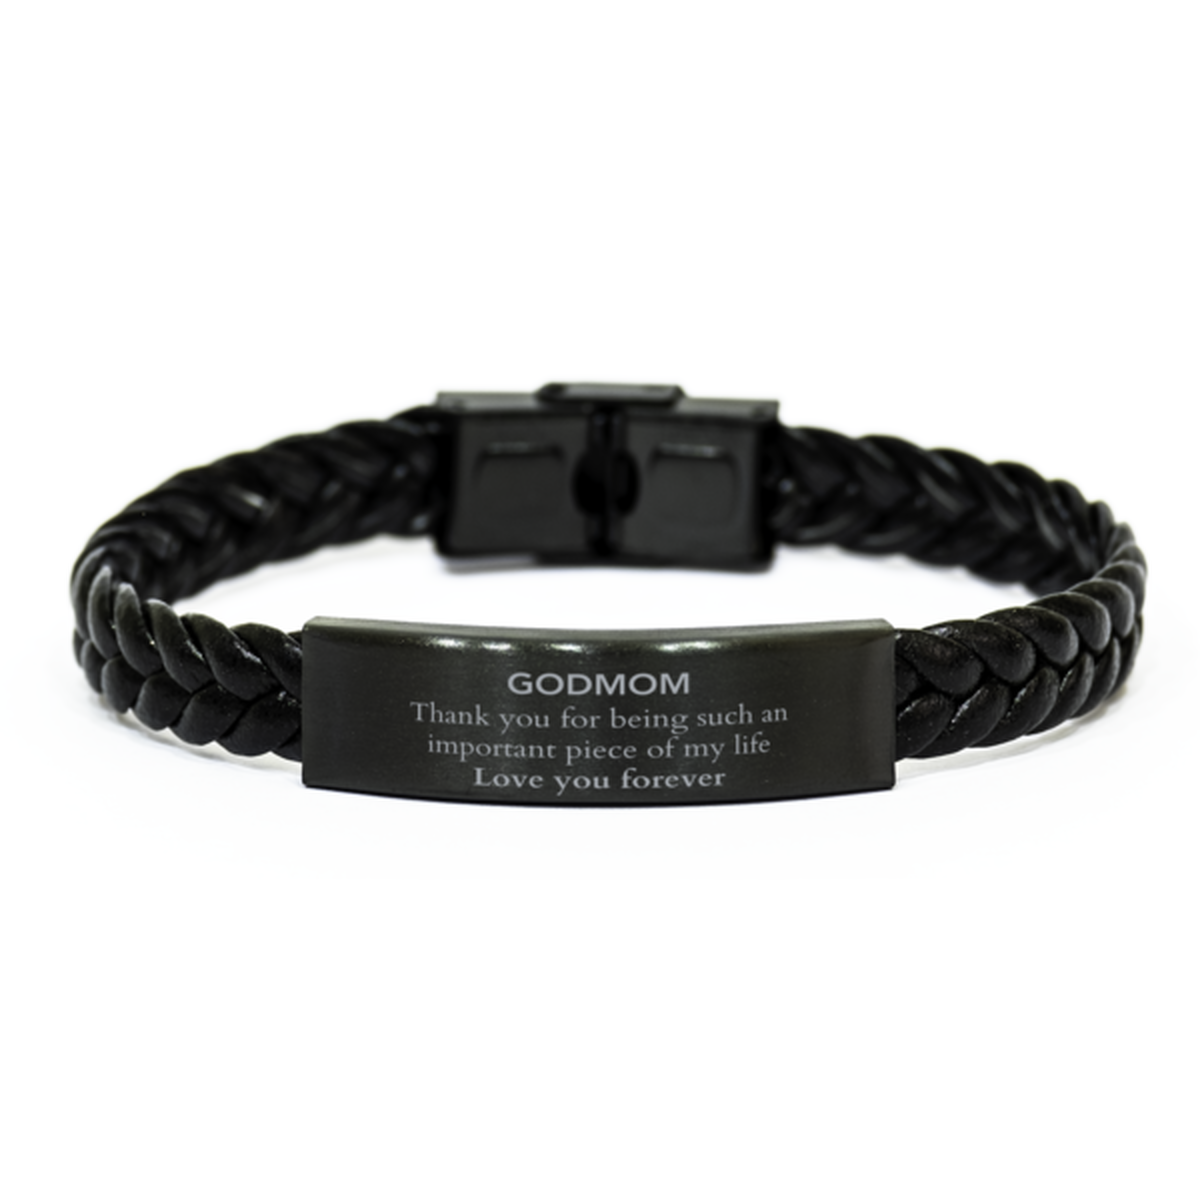 Appropriate Godmom Braided Leather Bracelet Epic Birthday Gifts for Godmom Thank you for being such an important piece of my life Godmom Christmas Mothers Fathers Day